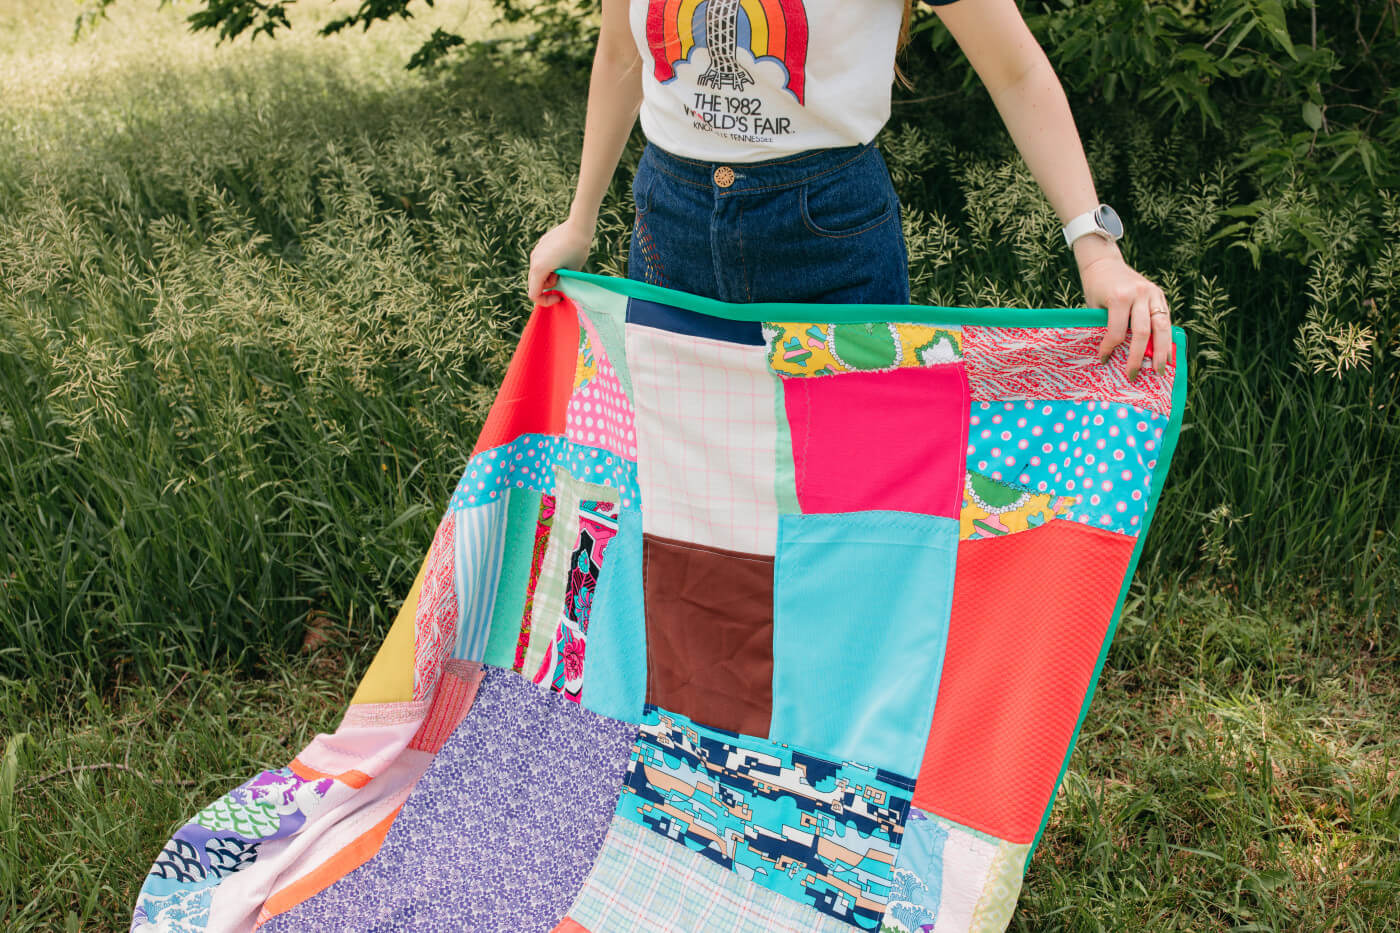 A white woman spreads a patchwork blanket over the grass.